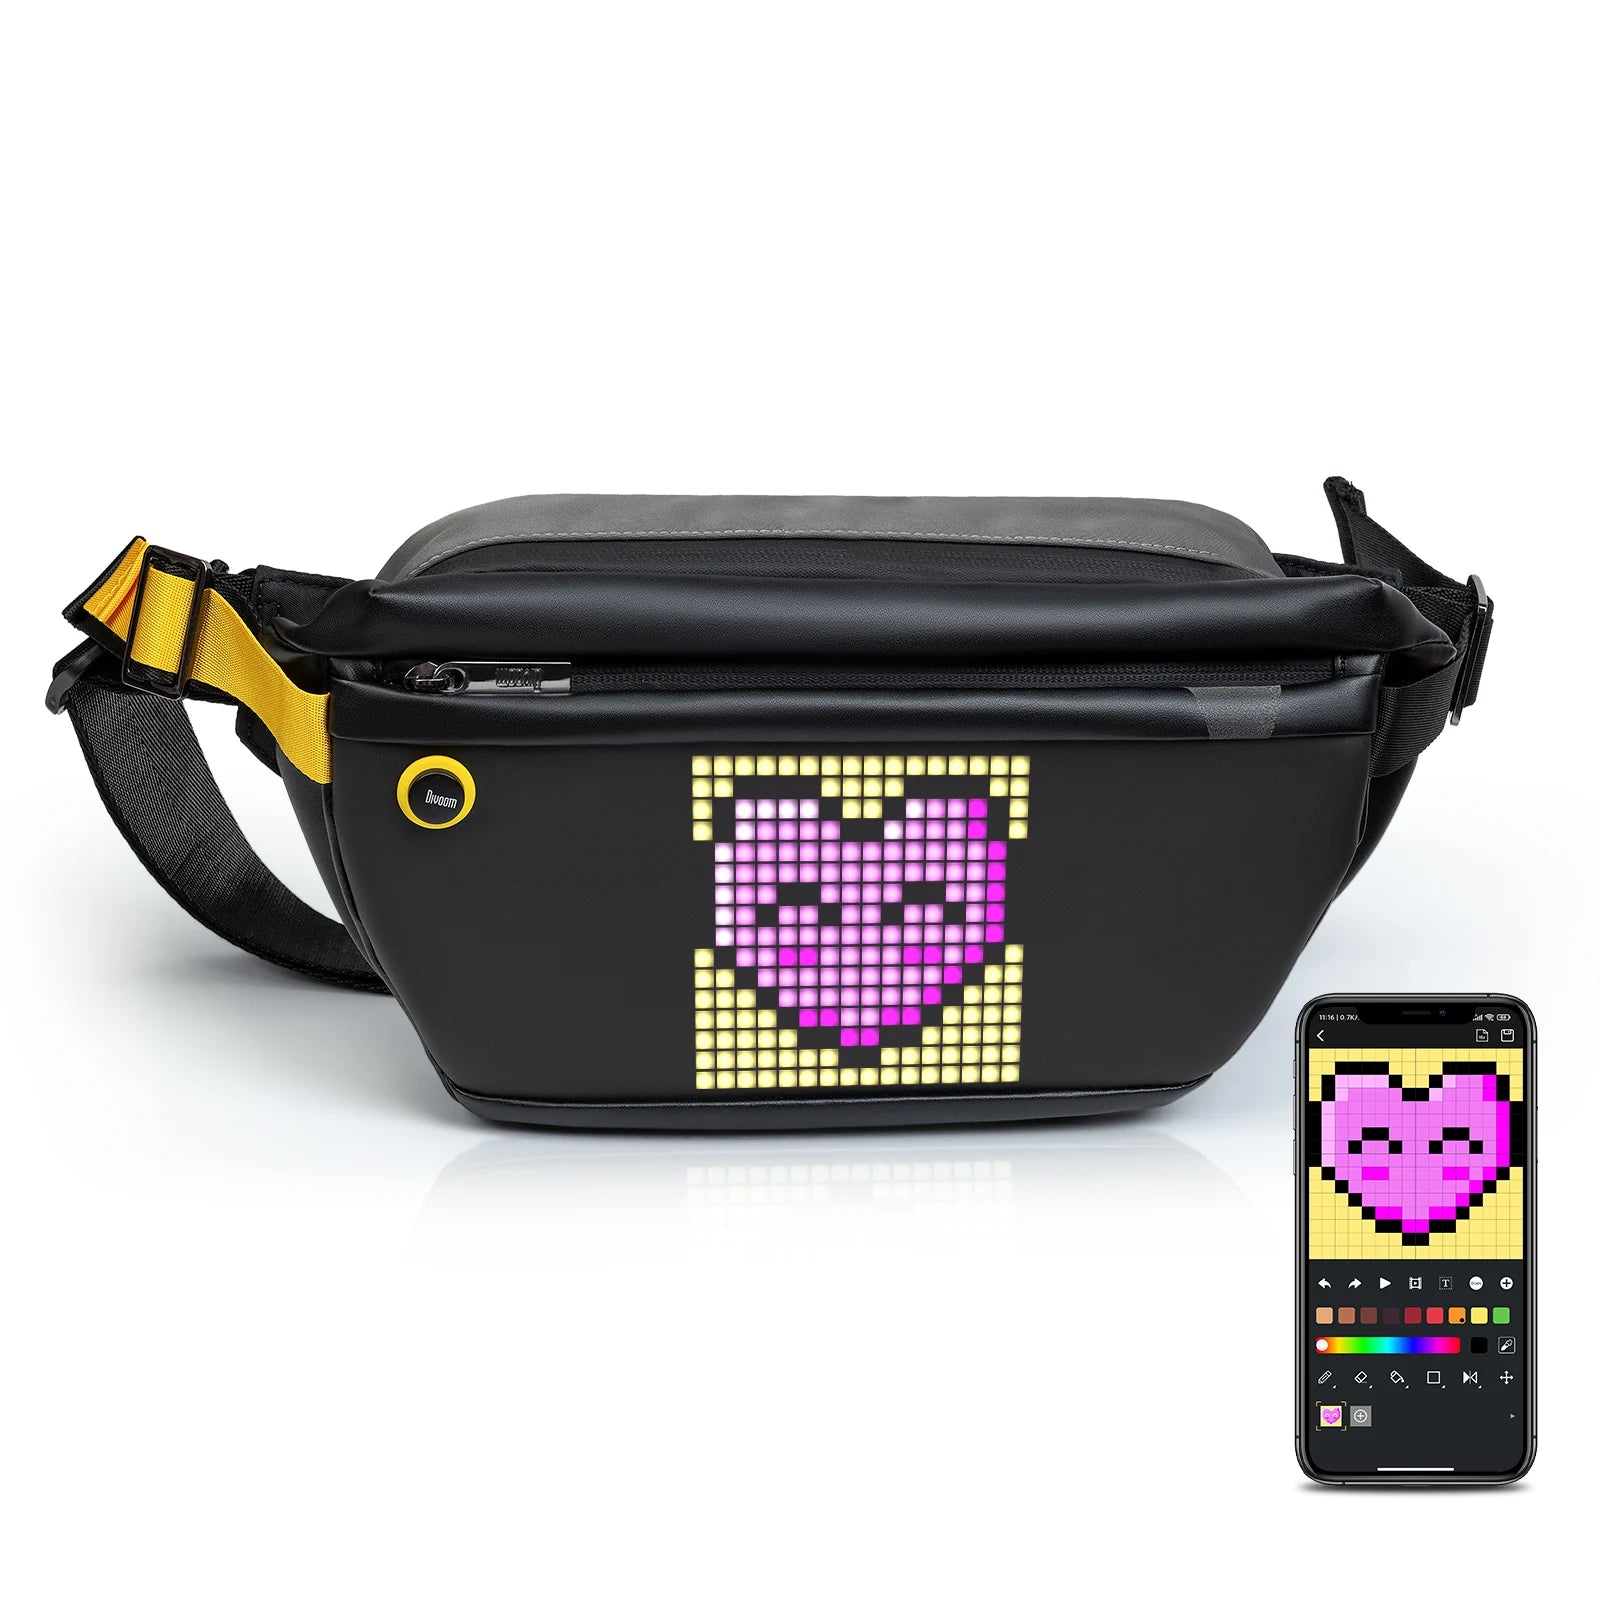 Divoom Pixel Art Sling Bag - Customizable Fashion Design, Outdoor Sport Waterproof, Ideal for Biking, Hiking, and Outdoor Activities with Spacious Interior Black / CHINA